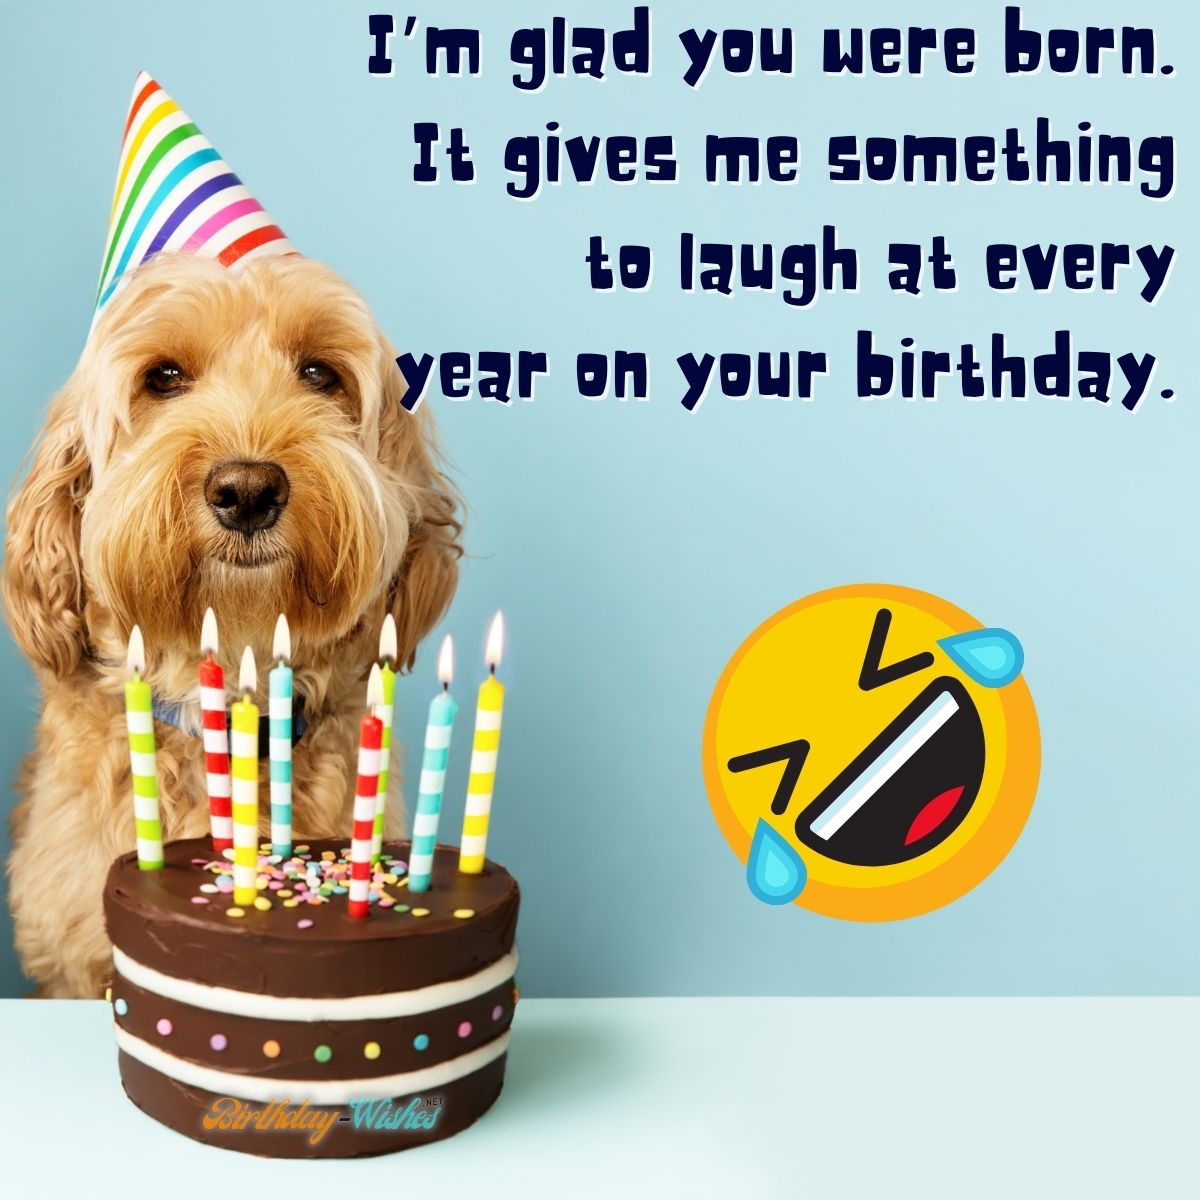 funny and insult birthday message with dog and birthday cake